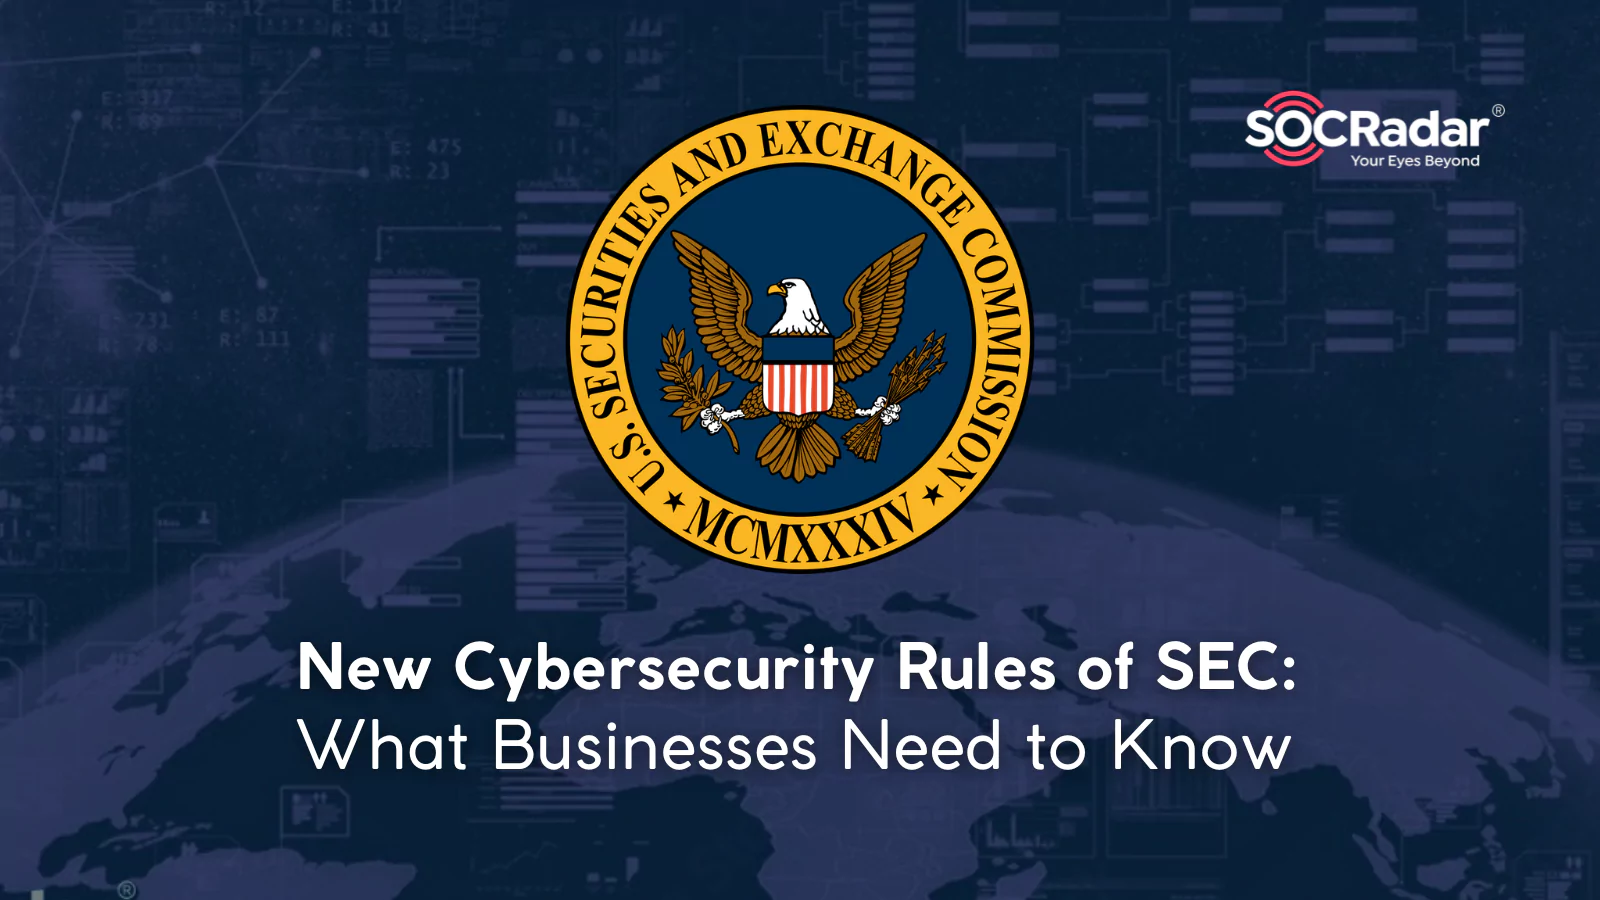 SOCRadar® Cyber Intelligence Inc. | New Cybersecurity Rules of SEC: What Businesses Need to Know